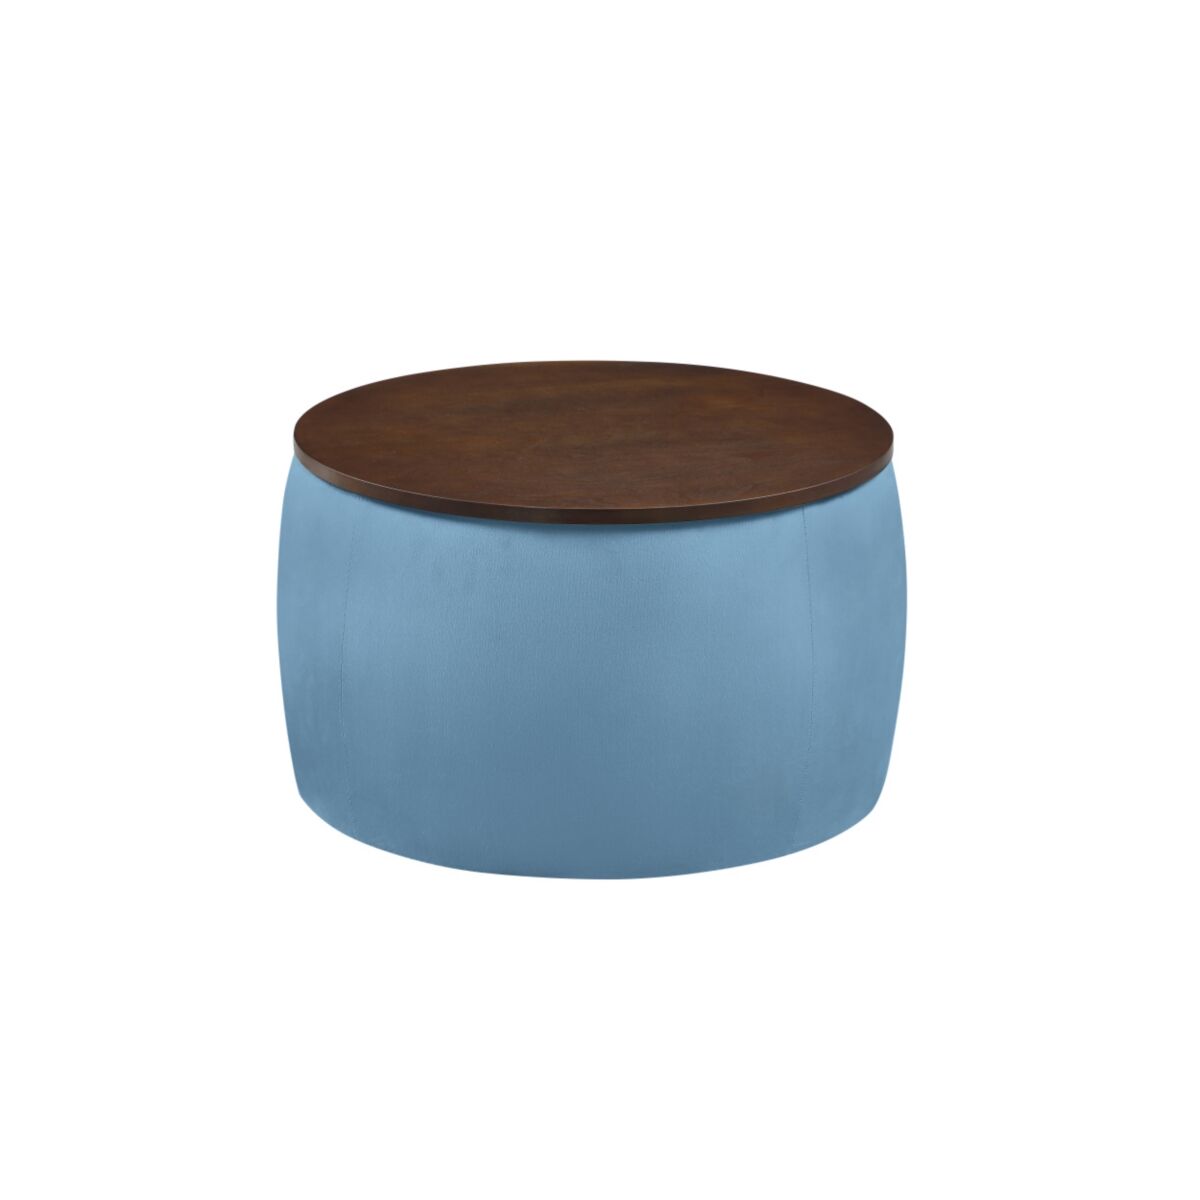 Simplie Fun Round Ottoman Set with Storage, 2 in 1 combination, Round Coffee Table, Square Footrest Footstool for Living Room Bedroom Entryway Office - Blue